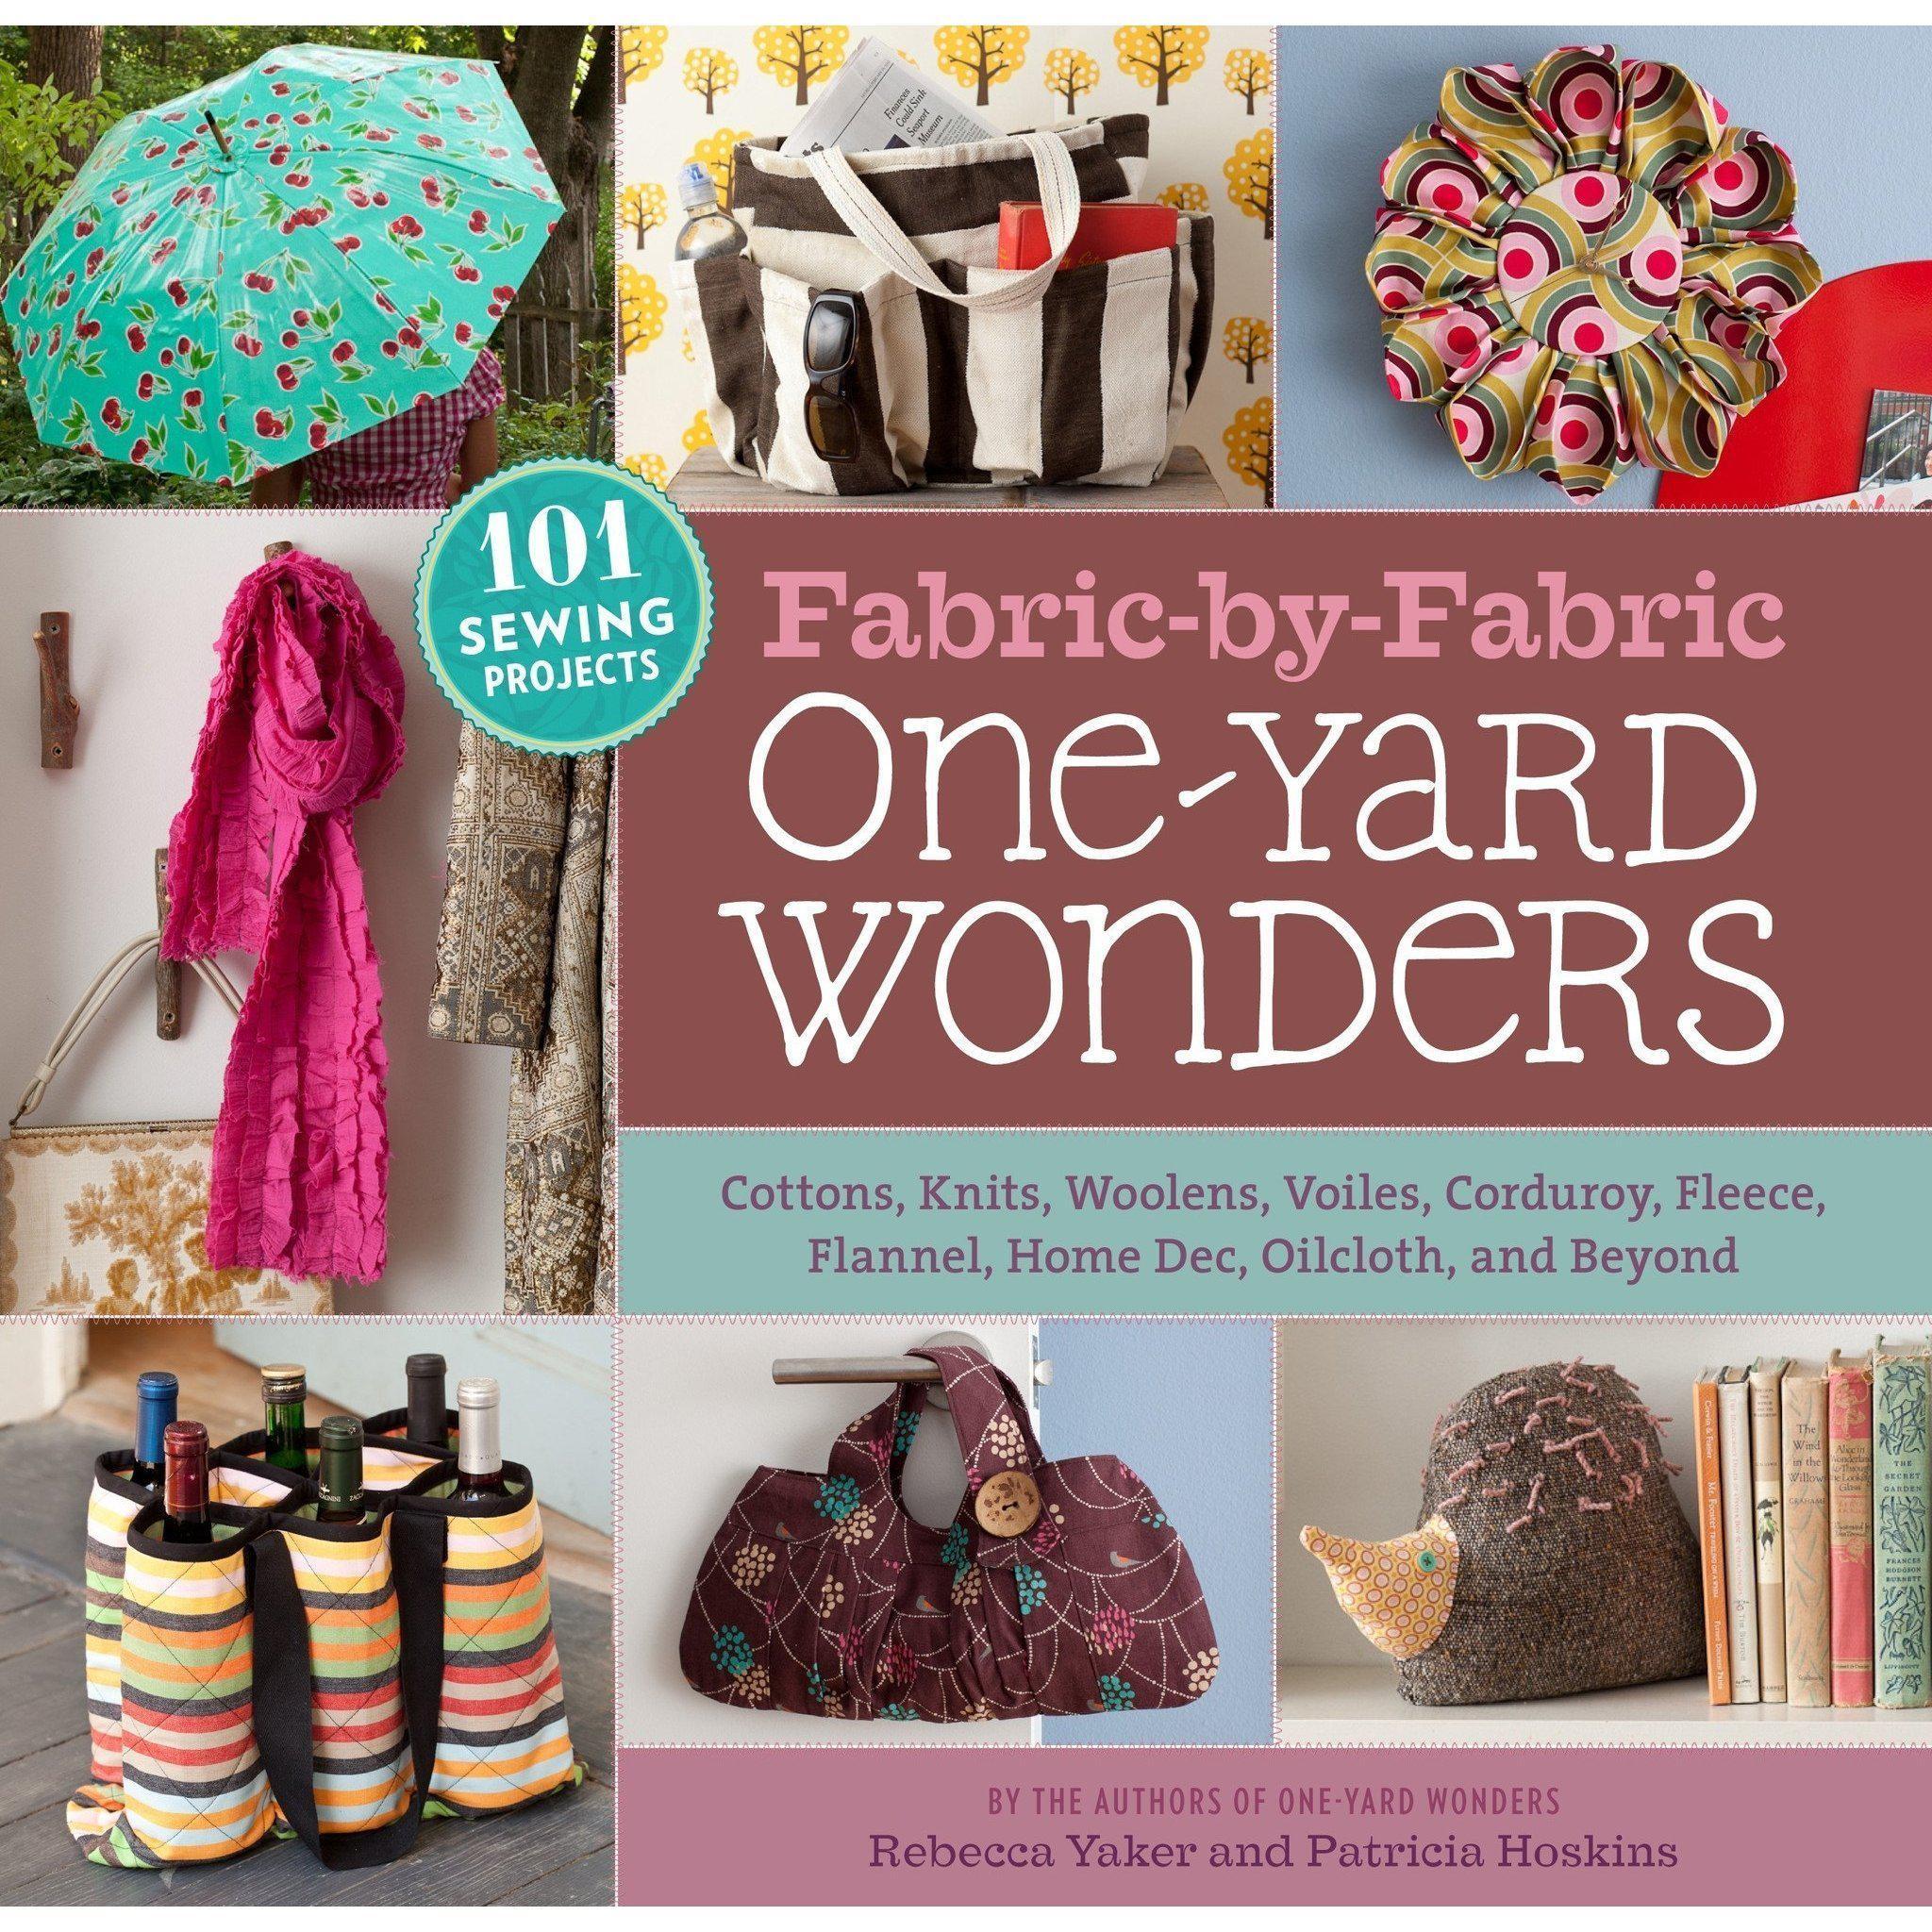 Fabric-by-Fabric One-Yard Wonders – gather here online